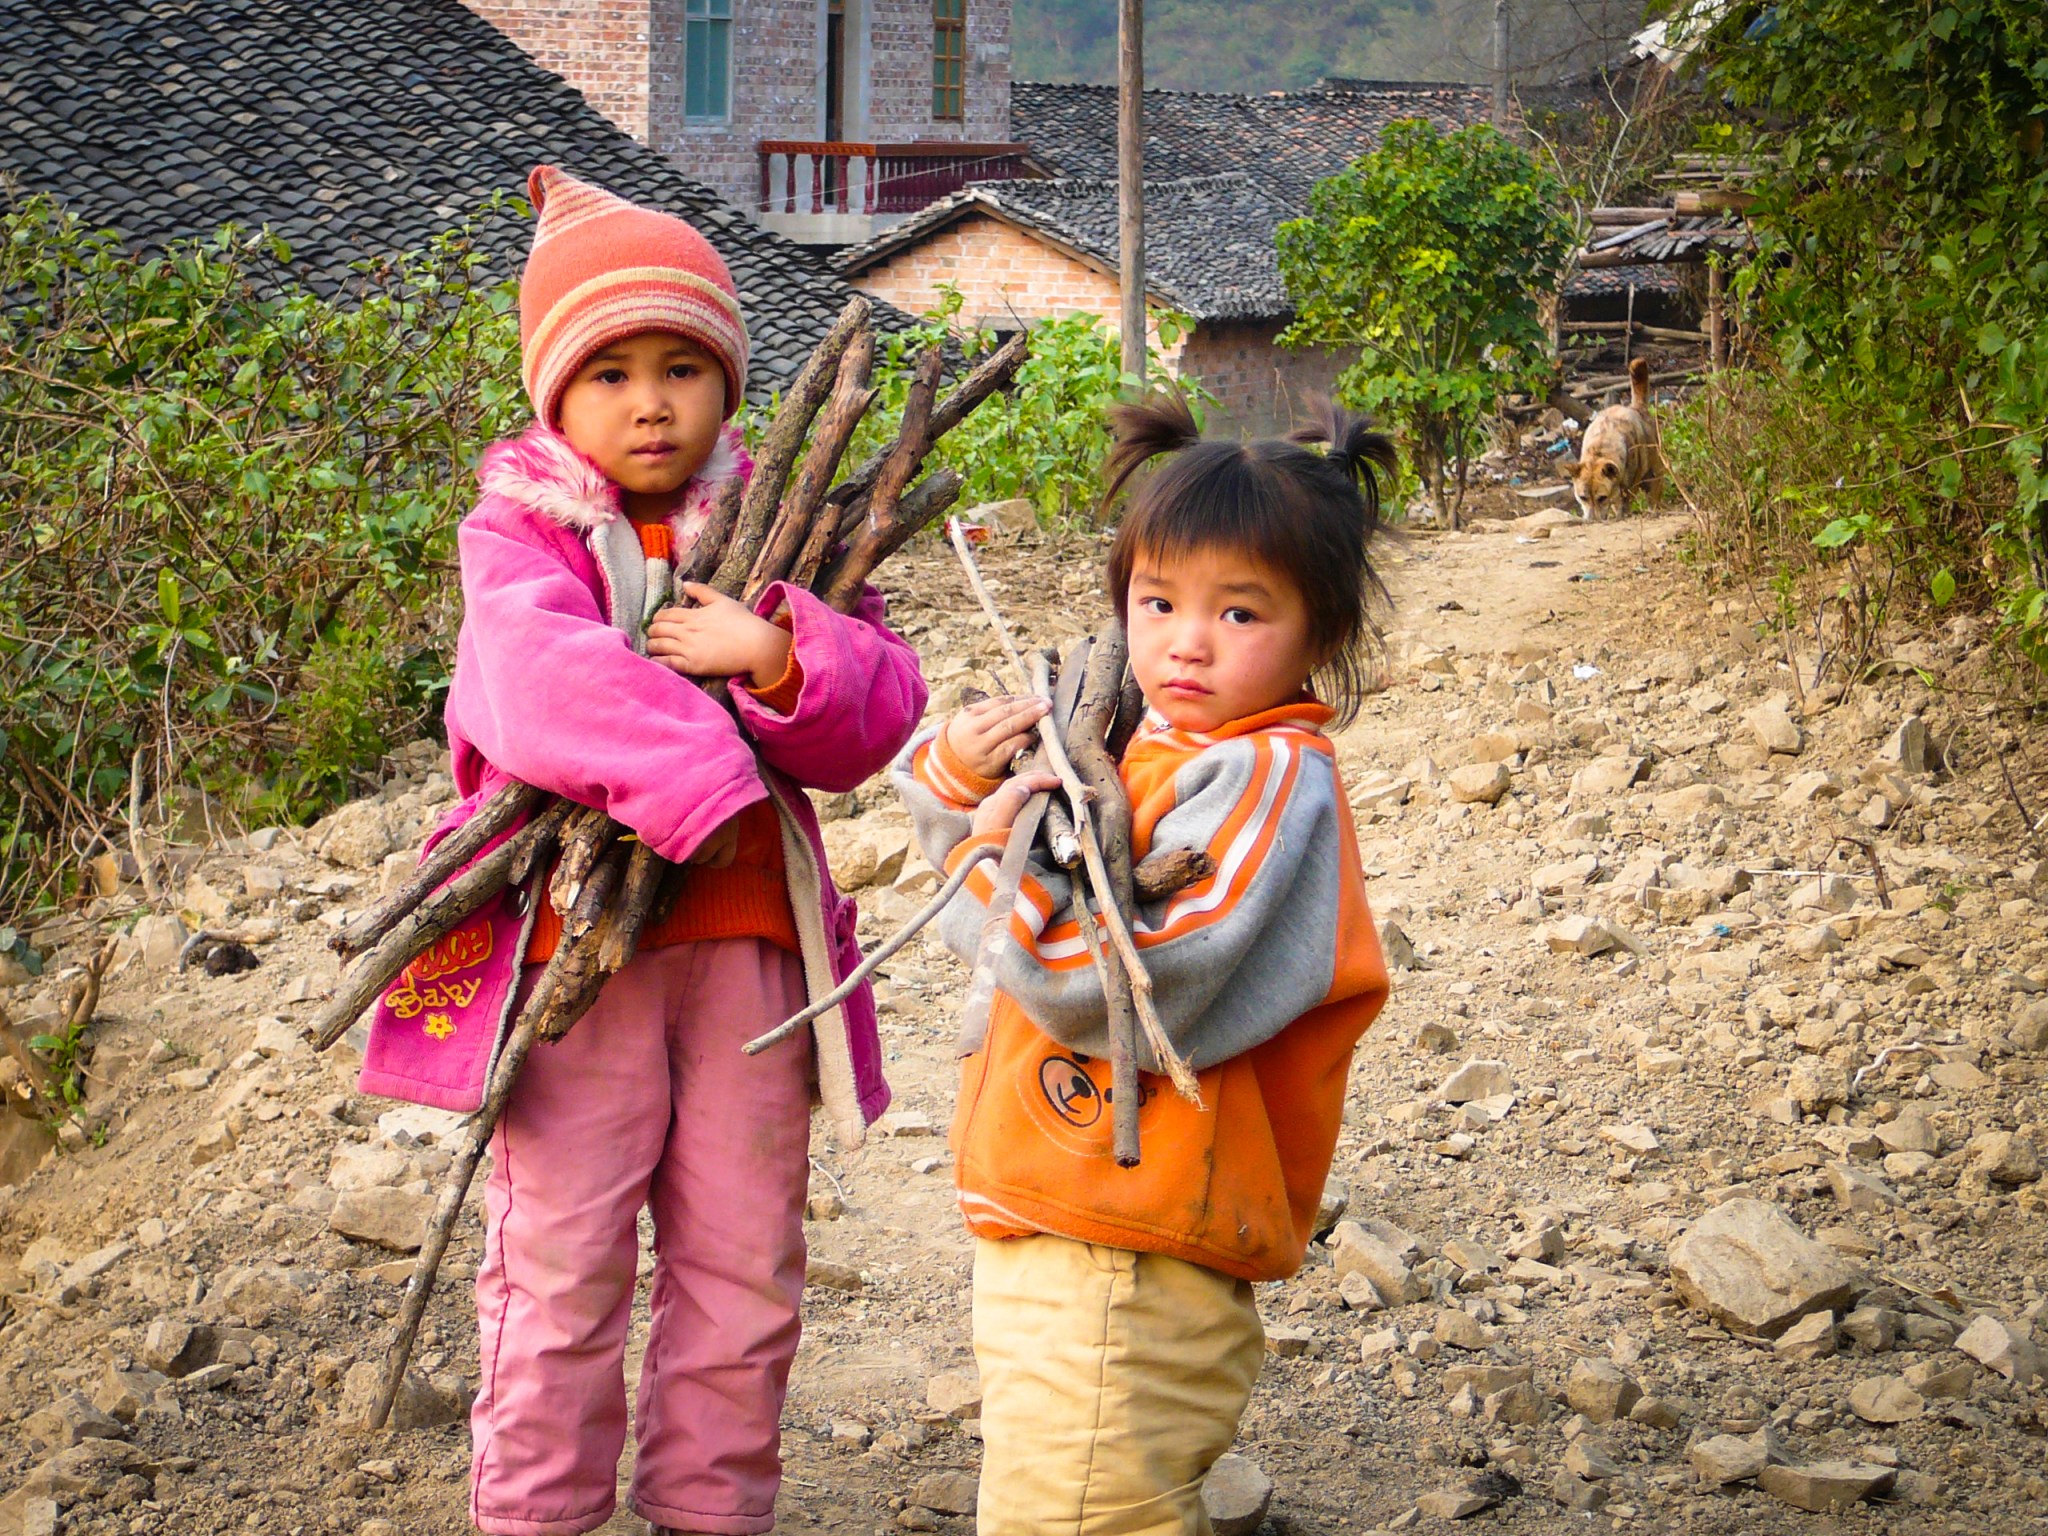 Village children collect firewood for cooking fuel, Tianlin County, Guangxi Zhuang Autonomous Region, China.